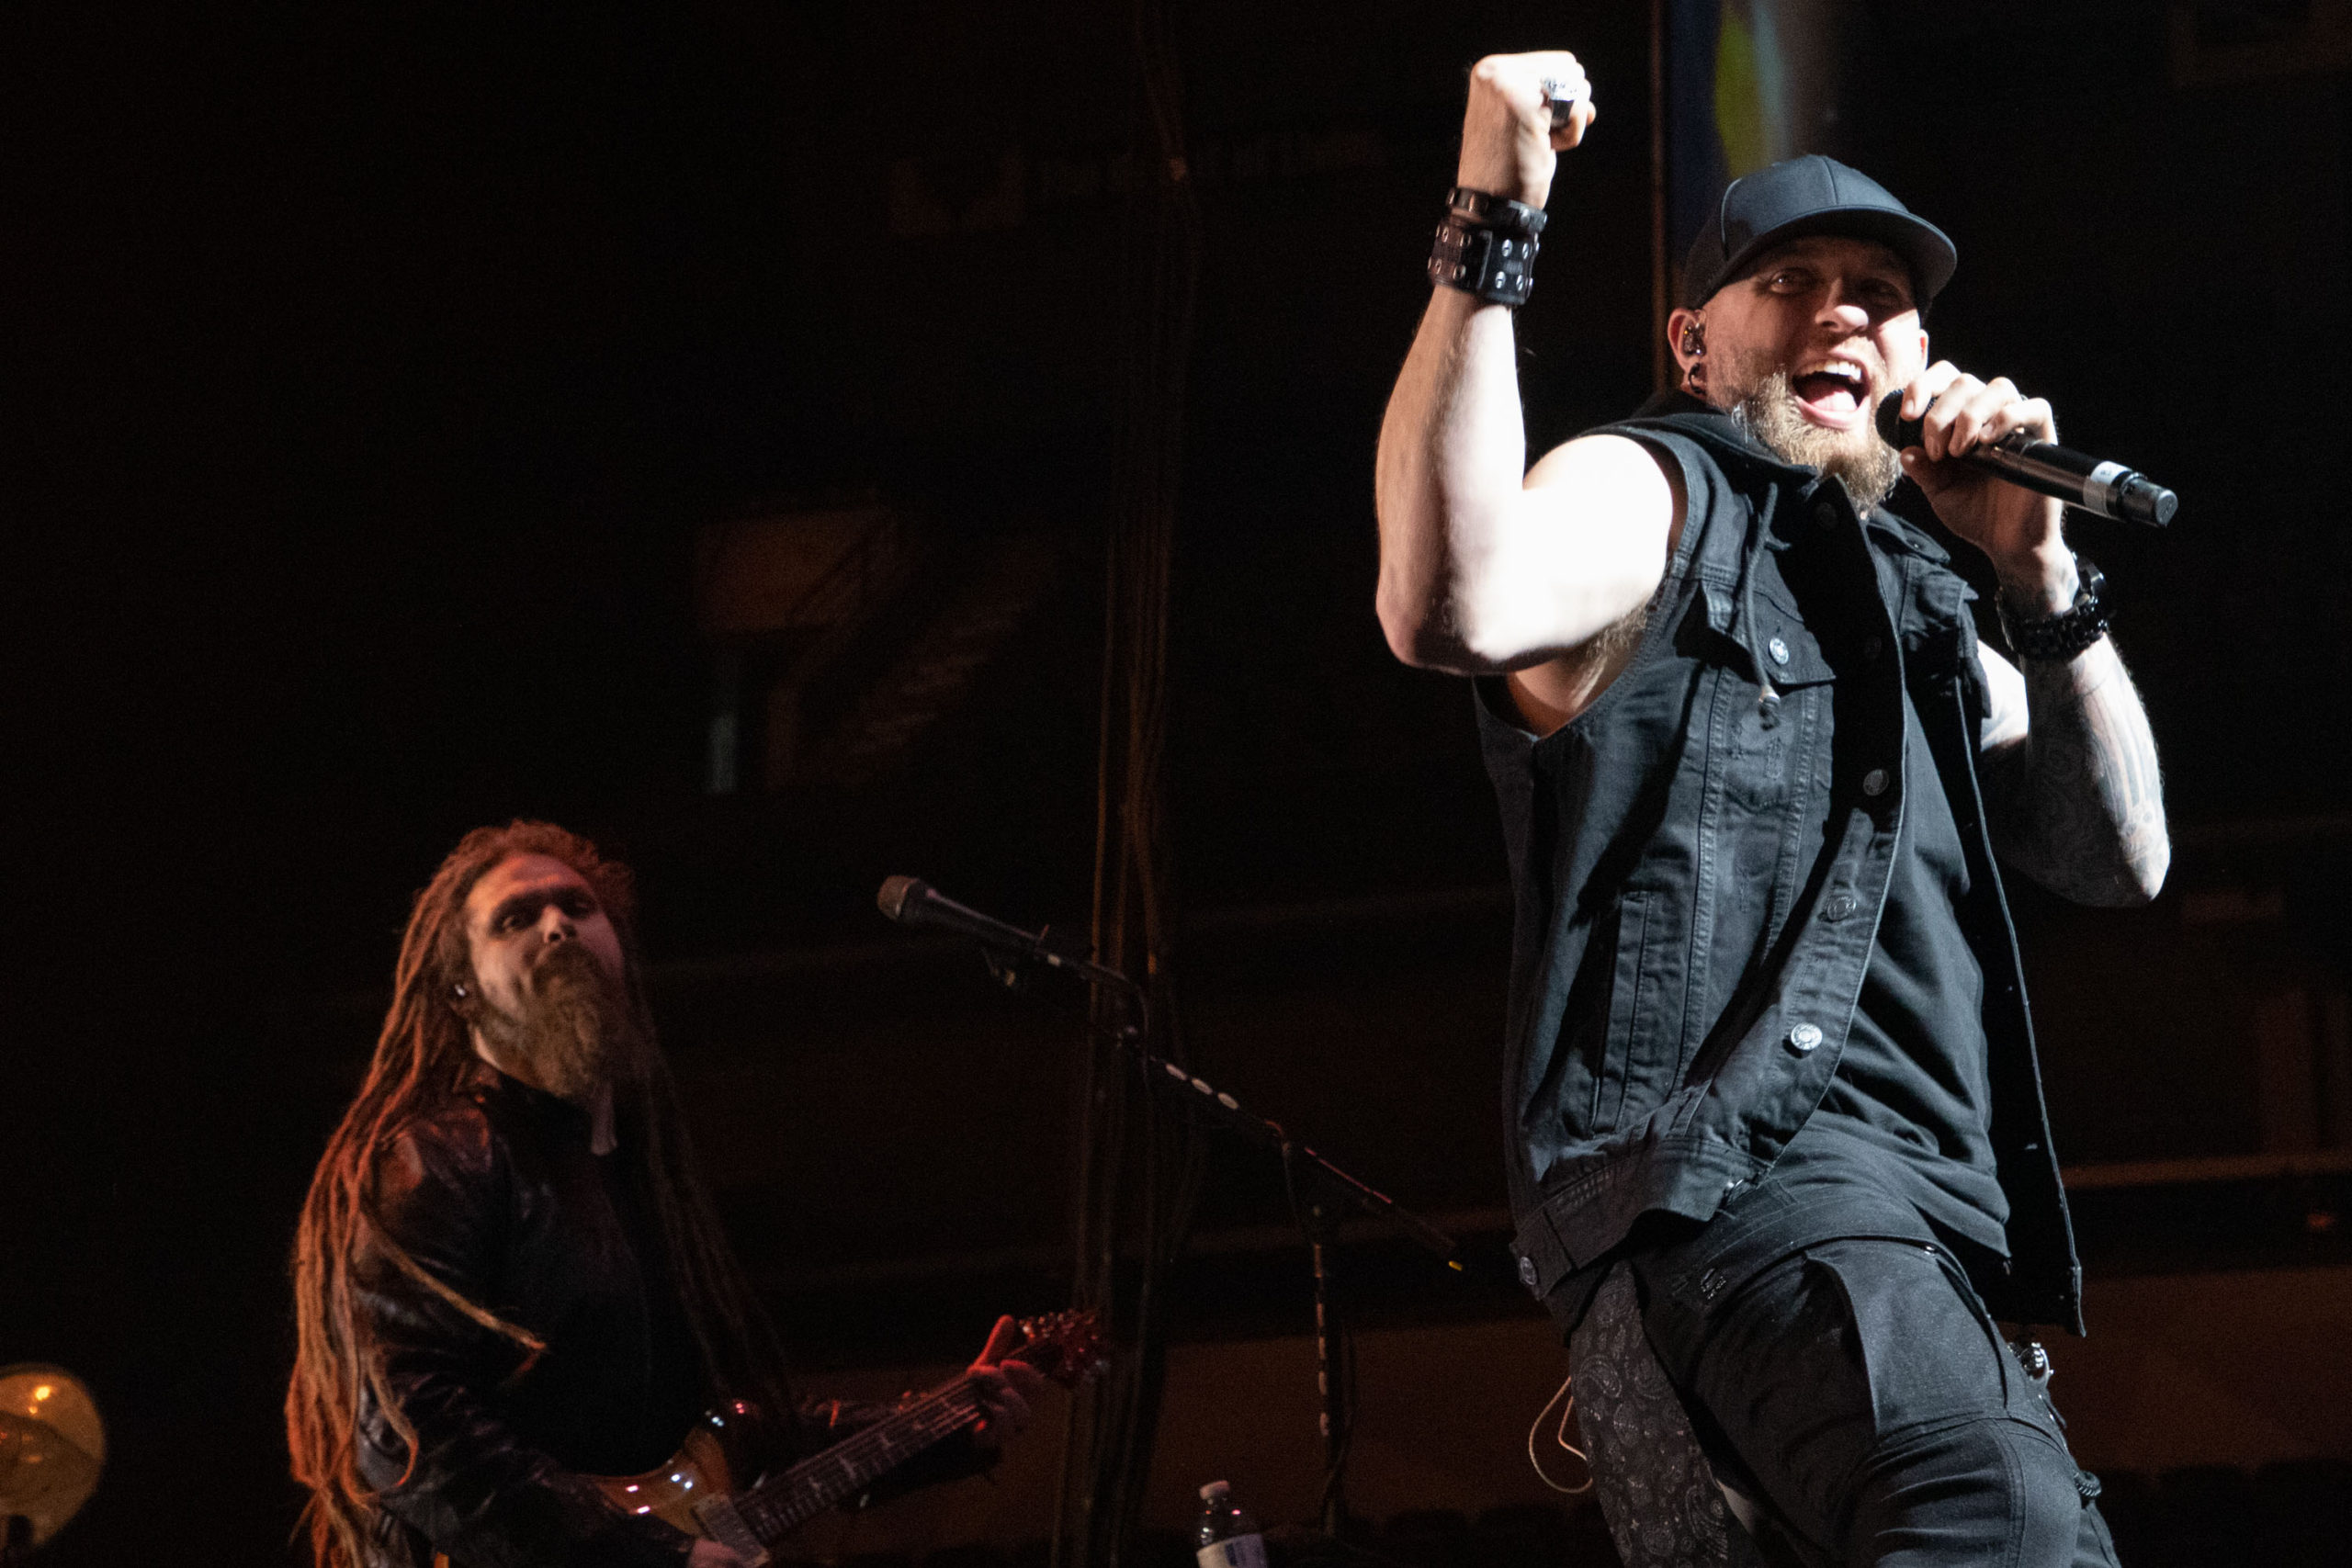 Brantley Gilbert kicked off his Fired Up Tour 2020 at Budweiser Gardens in London on Thursday night!